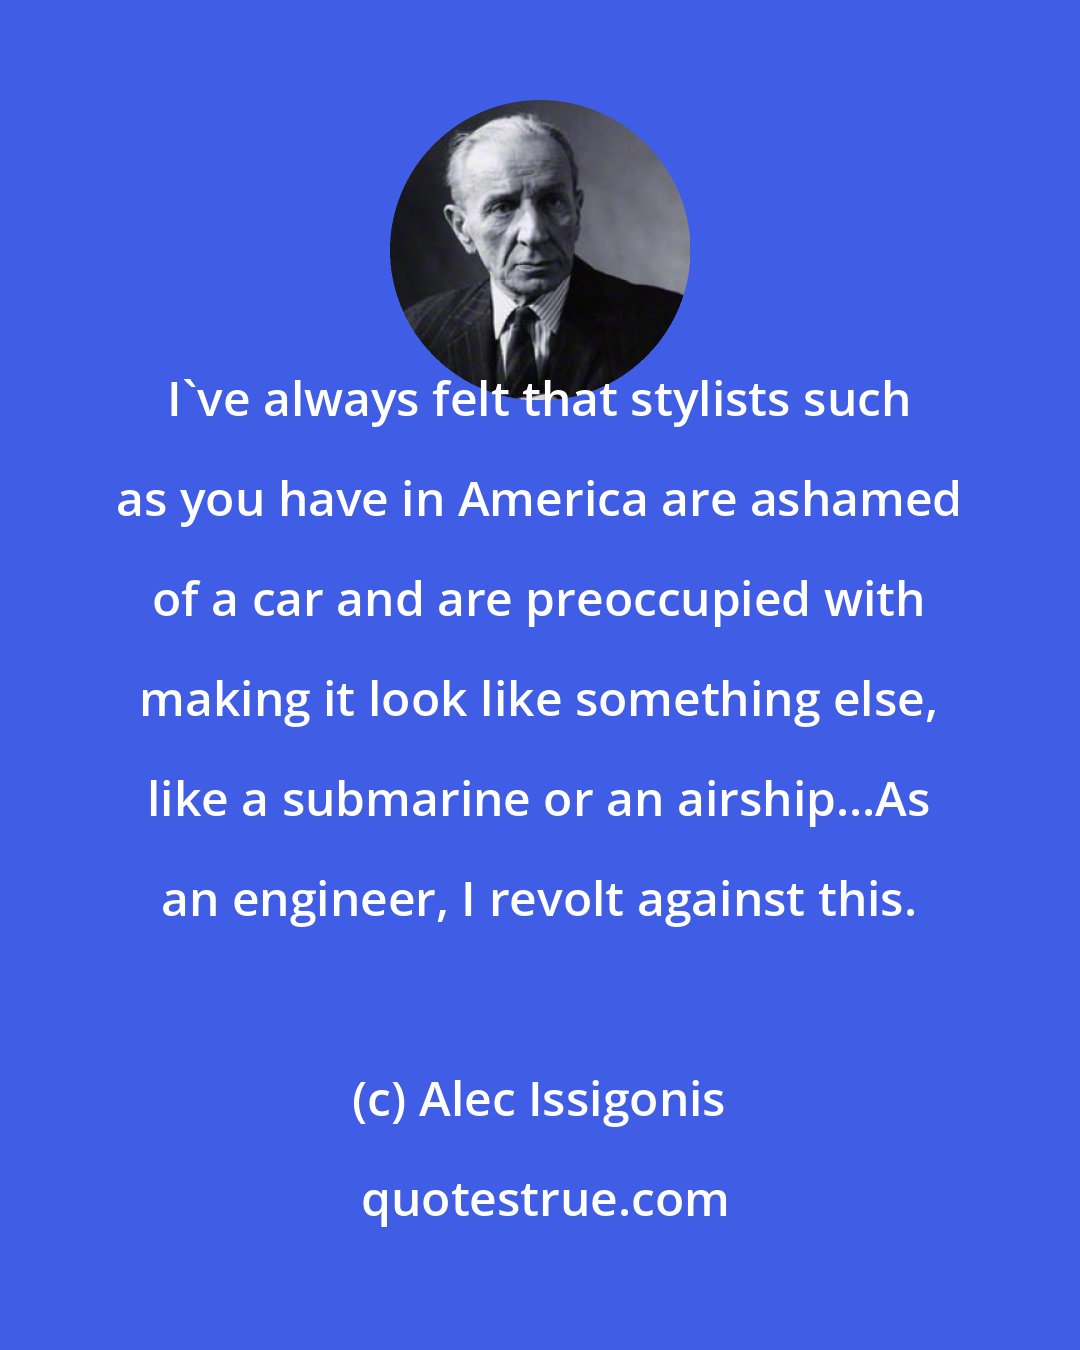 Alec Issigonis: I've always felt that stylists such as you have in America are ashamed of a car and are preoccupied with making it look like something else, like a submarine or an airship...As an engineer, I revolt against this.